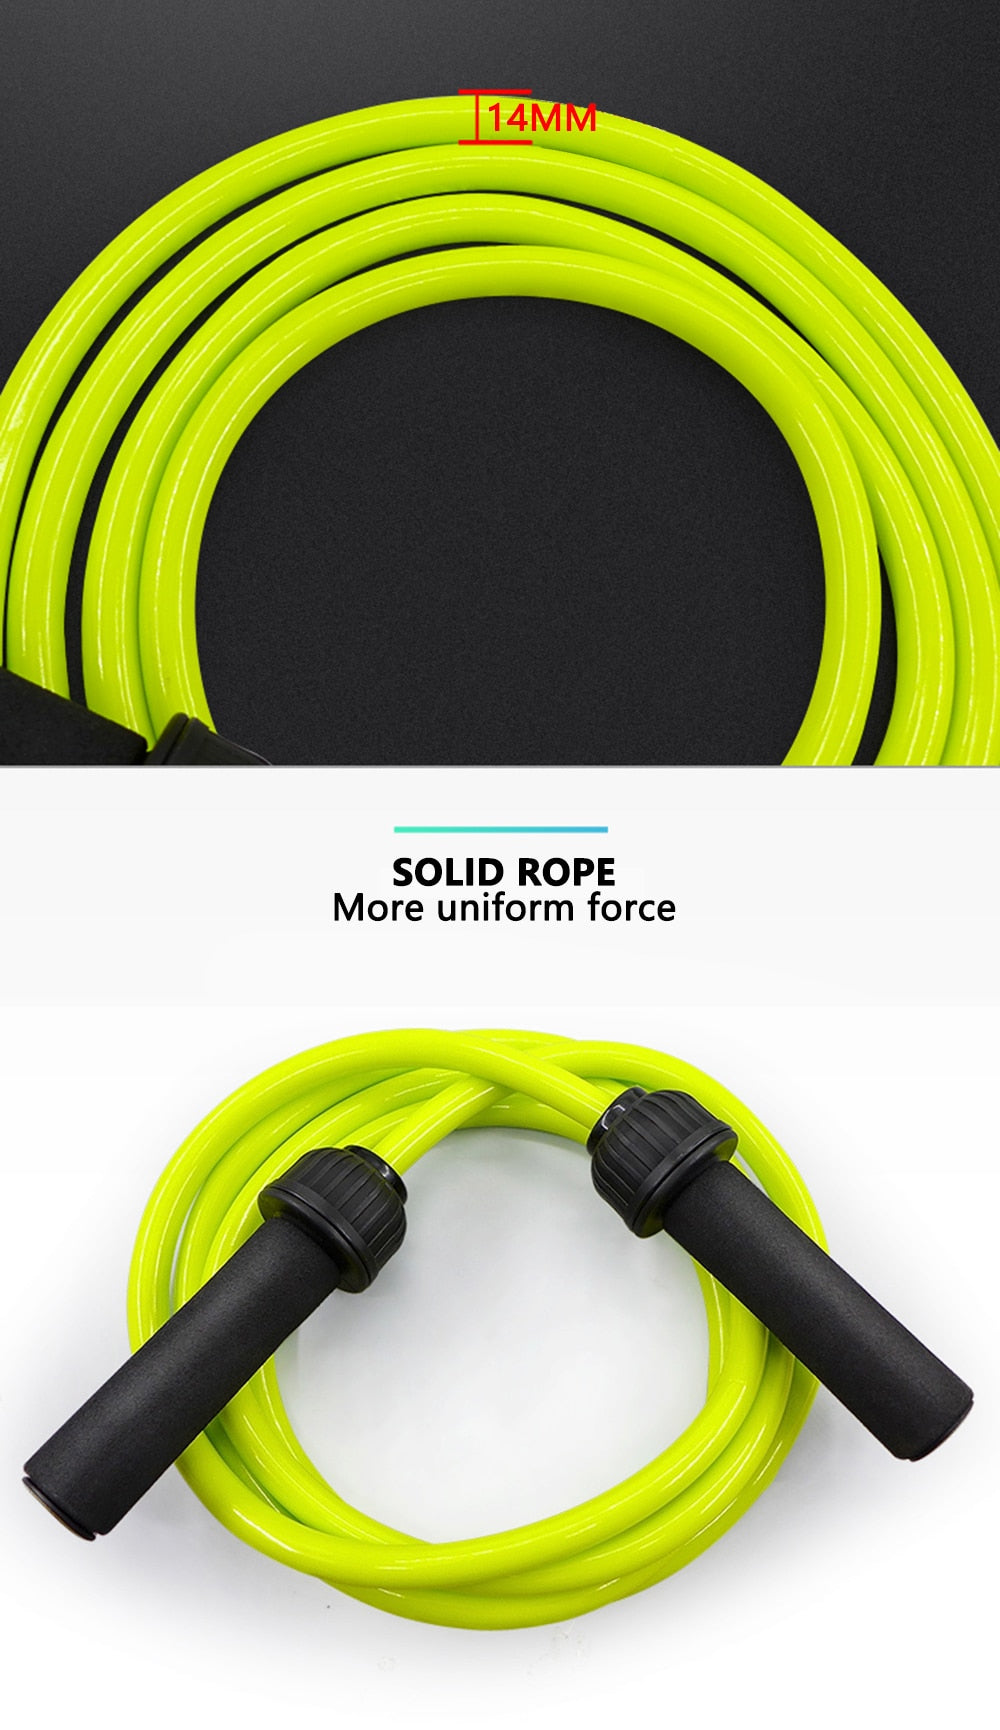 Heavy sport jump rope with adjustable skipping